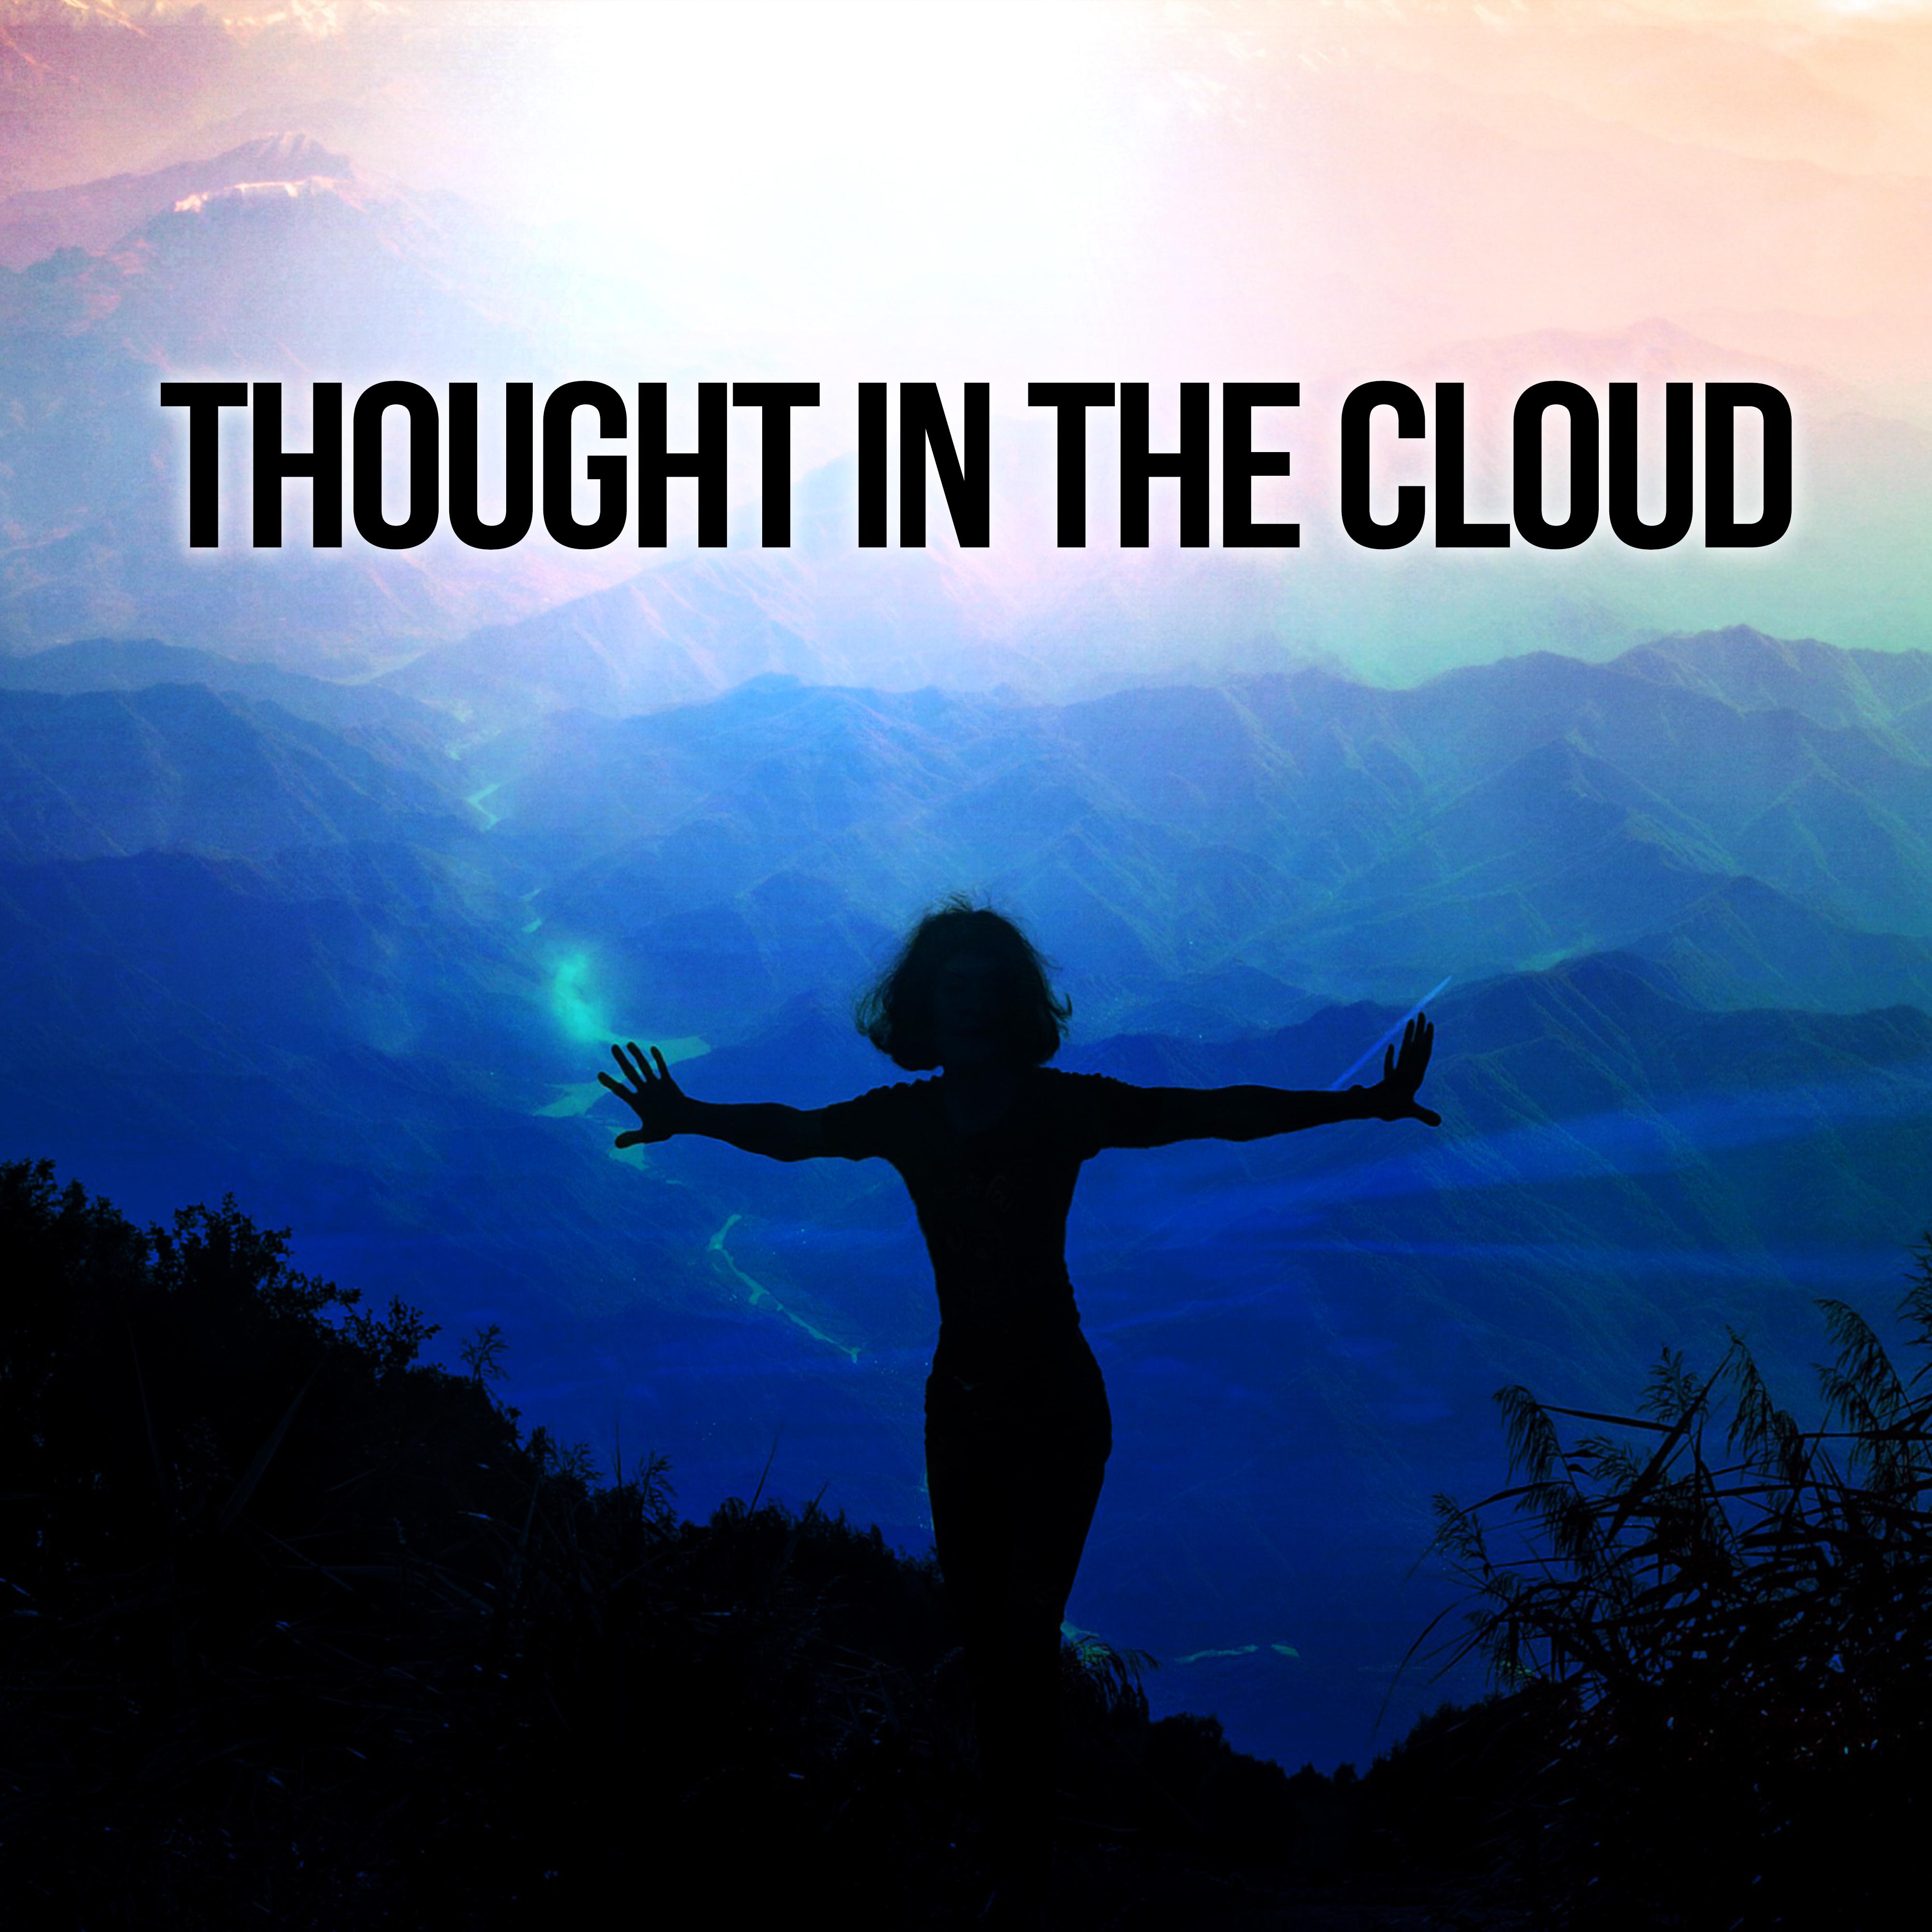 Thought in the Cloud – Thinking, Reflection, Meditation about Life